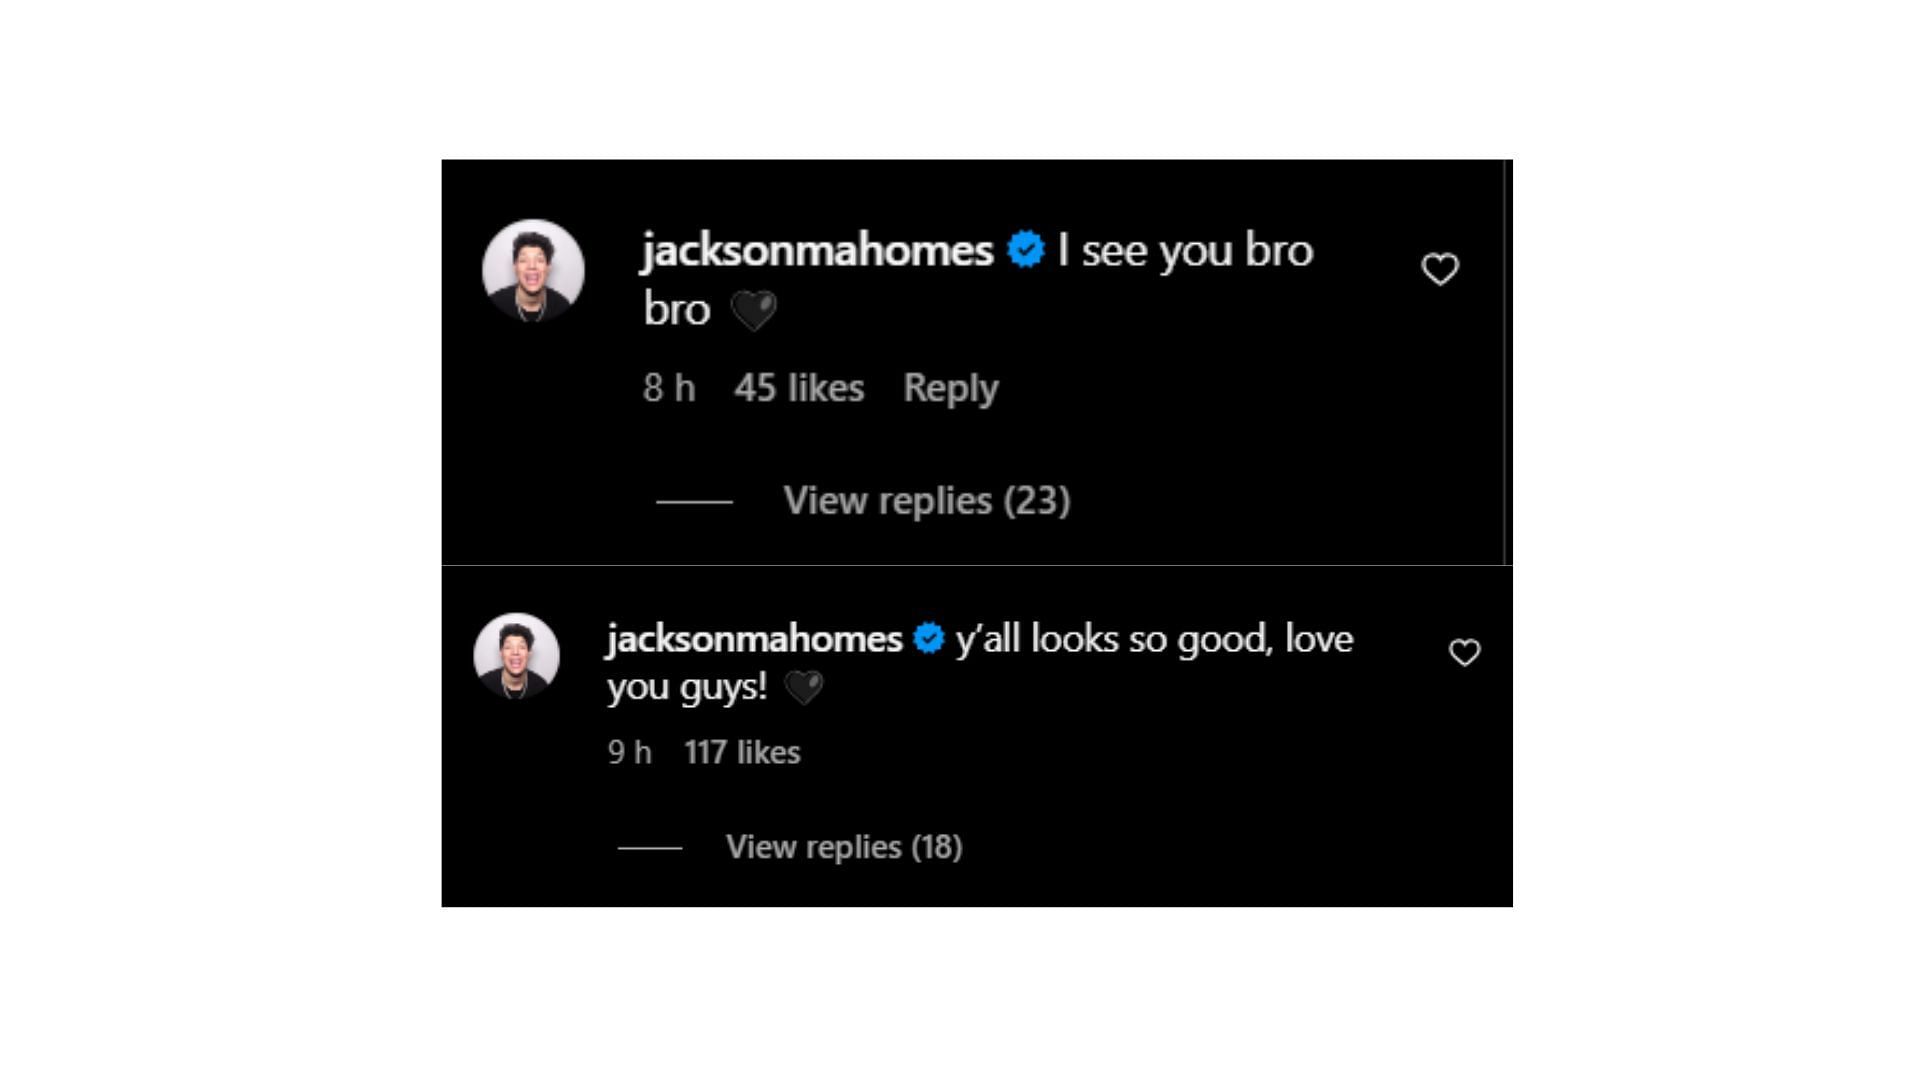 Jackson&#039;s first comment is from Patrick&#039;s post and second from his SIL&#039;s (Image Credit: Patrick and Brittany Mahomes&#039; posts&#039; comment section).